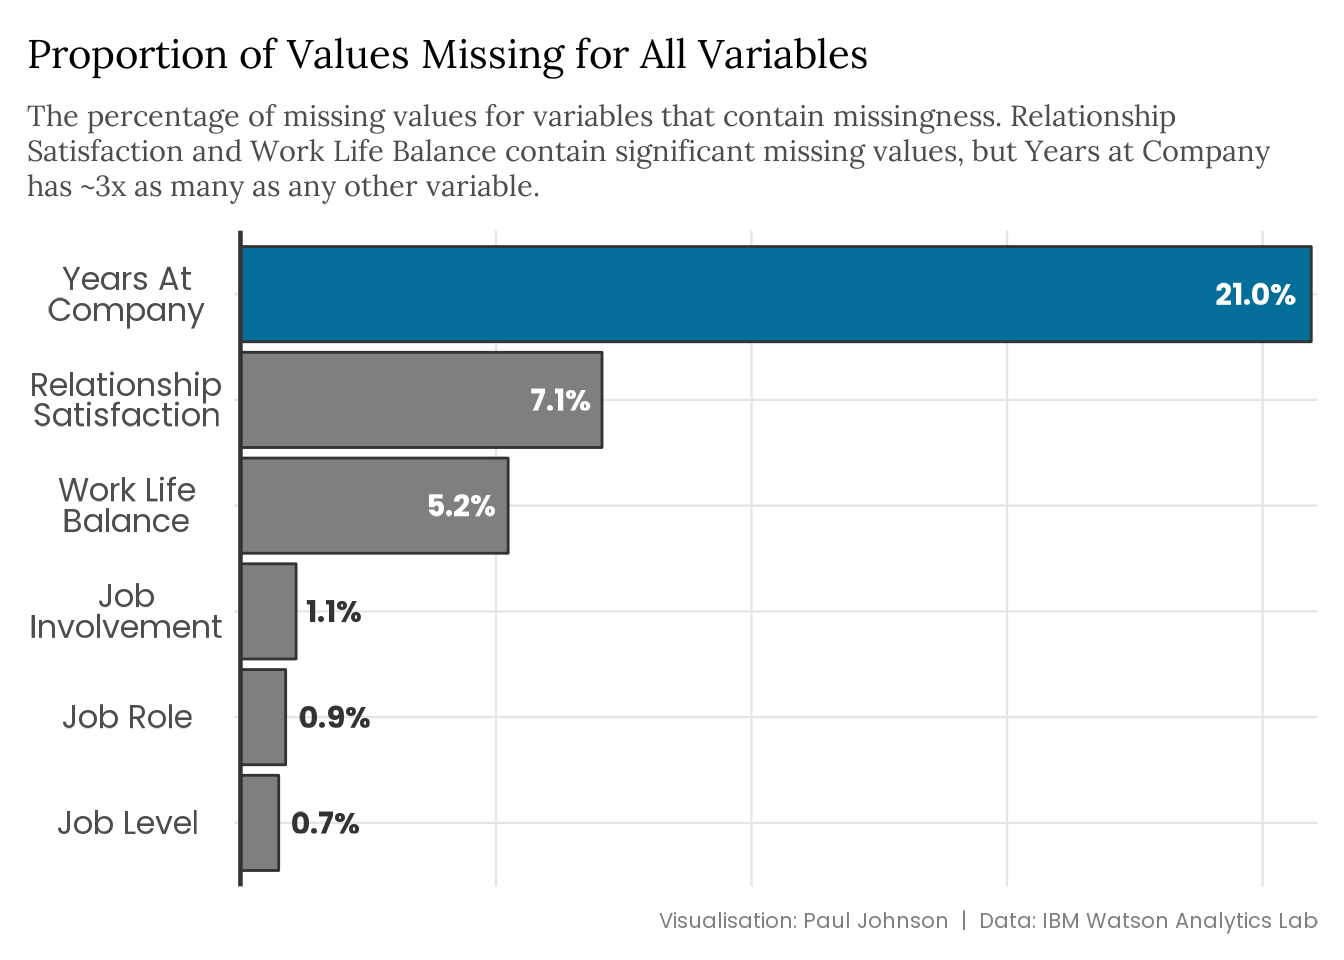 A bar chart visualising the proportion of missing values for each variable, excluding any variables that do not have any missing values. There are six variables with missing values - years at company (21%), relationship satisfaction (7.1%), work life balance (5.2%), job role (1.1%), job level (0.9%), and job involvement (0.7%). 